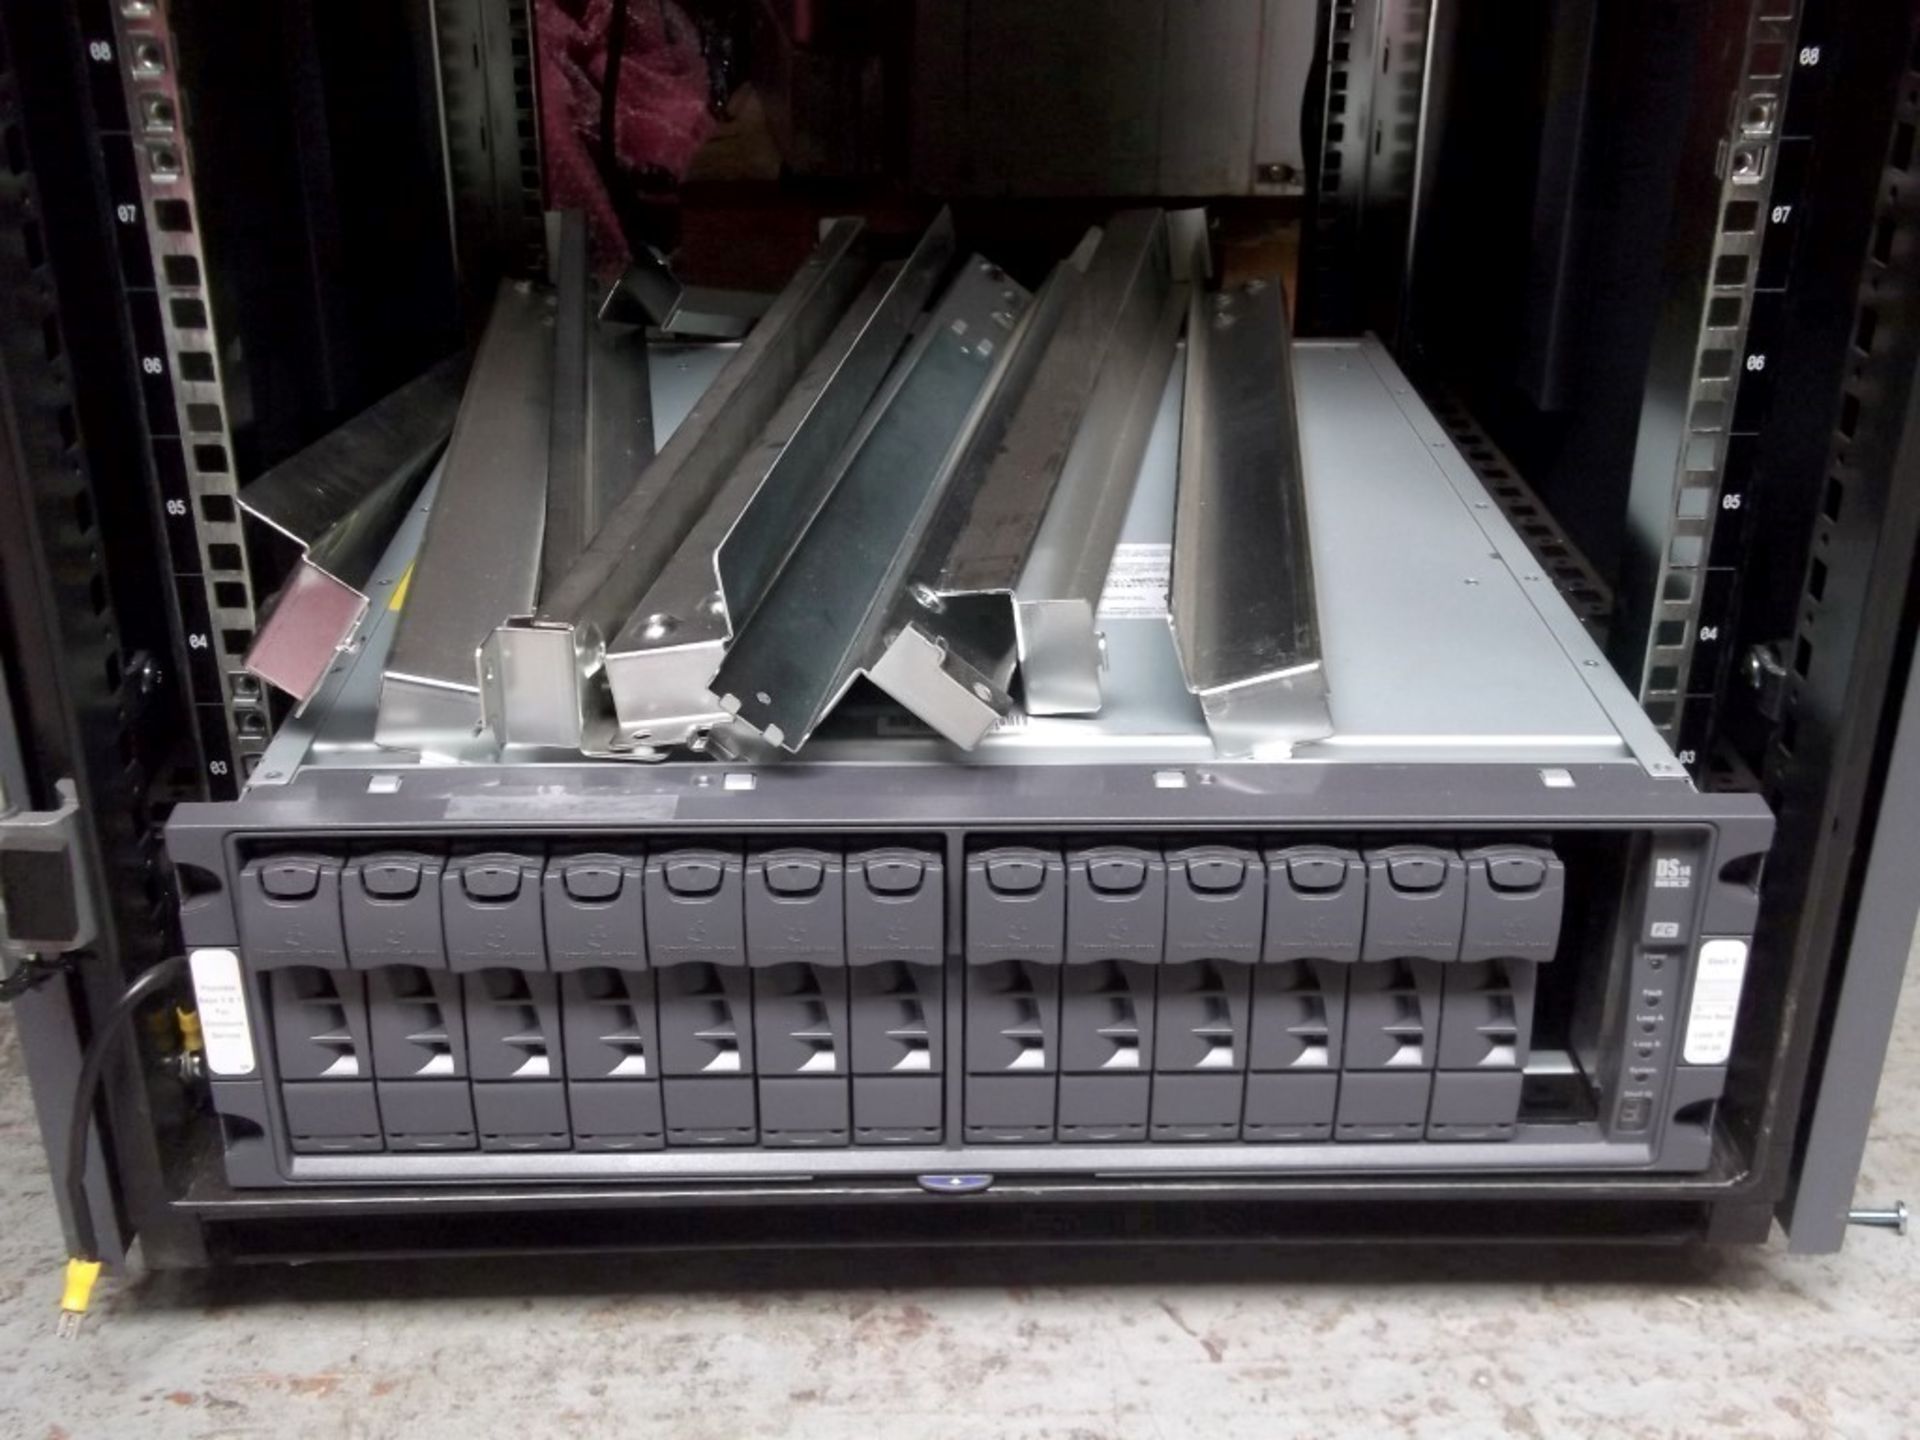 1 x Net APP Server Rack With NetApp FAS940 and A Selection of Drive Bays - CL106 - Ref: NSB007 - - Image 3 of 3